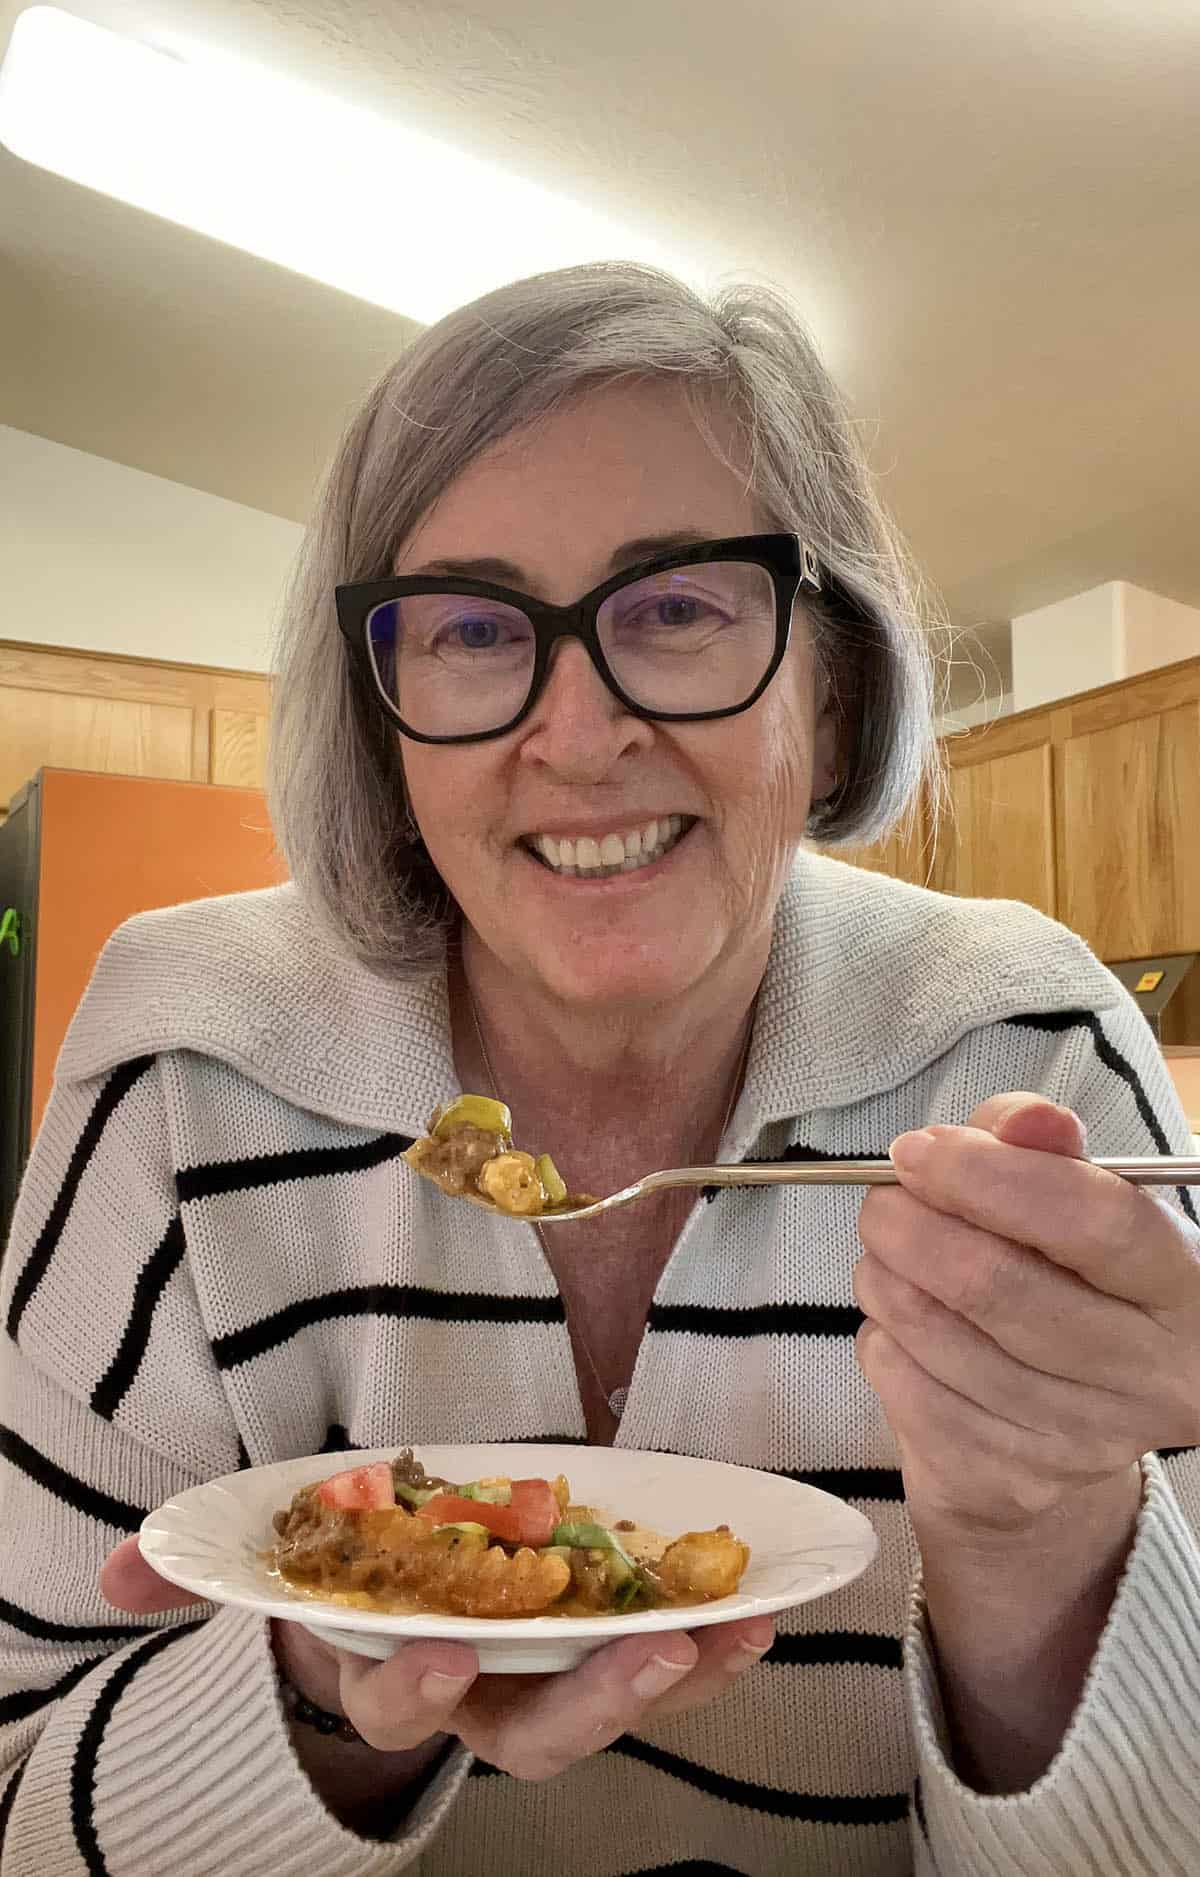 Food Blogger Deb Clark eating the Cheeseburger French Fry Casserole.